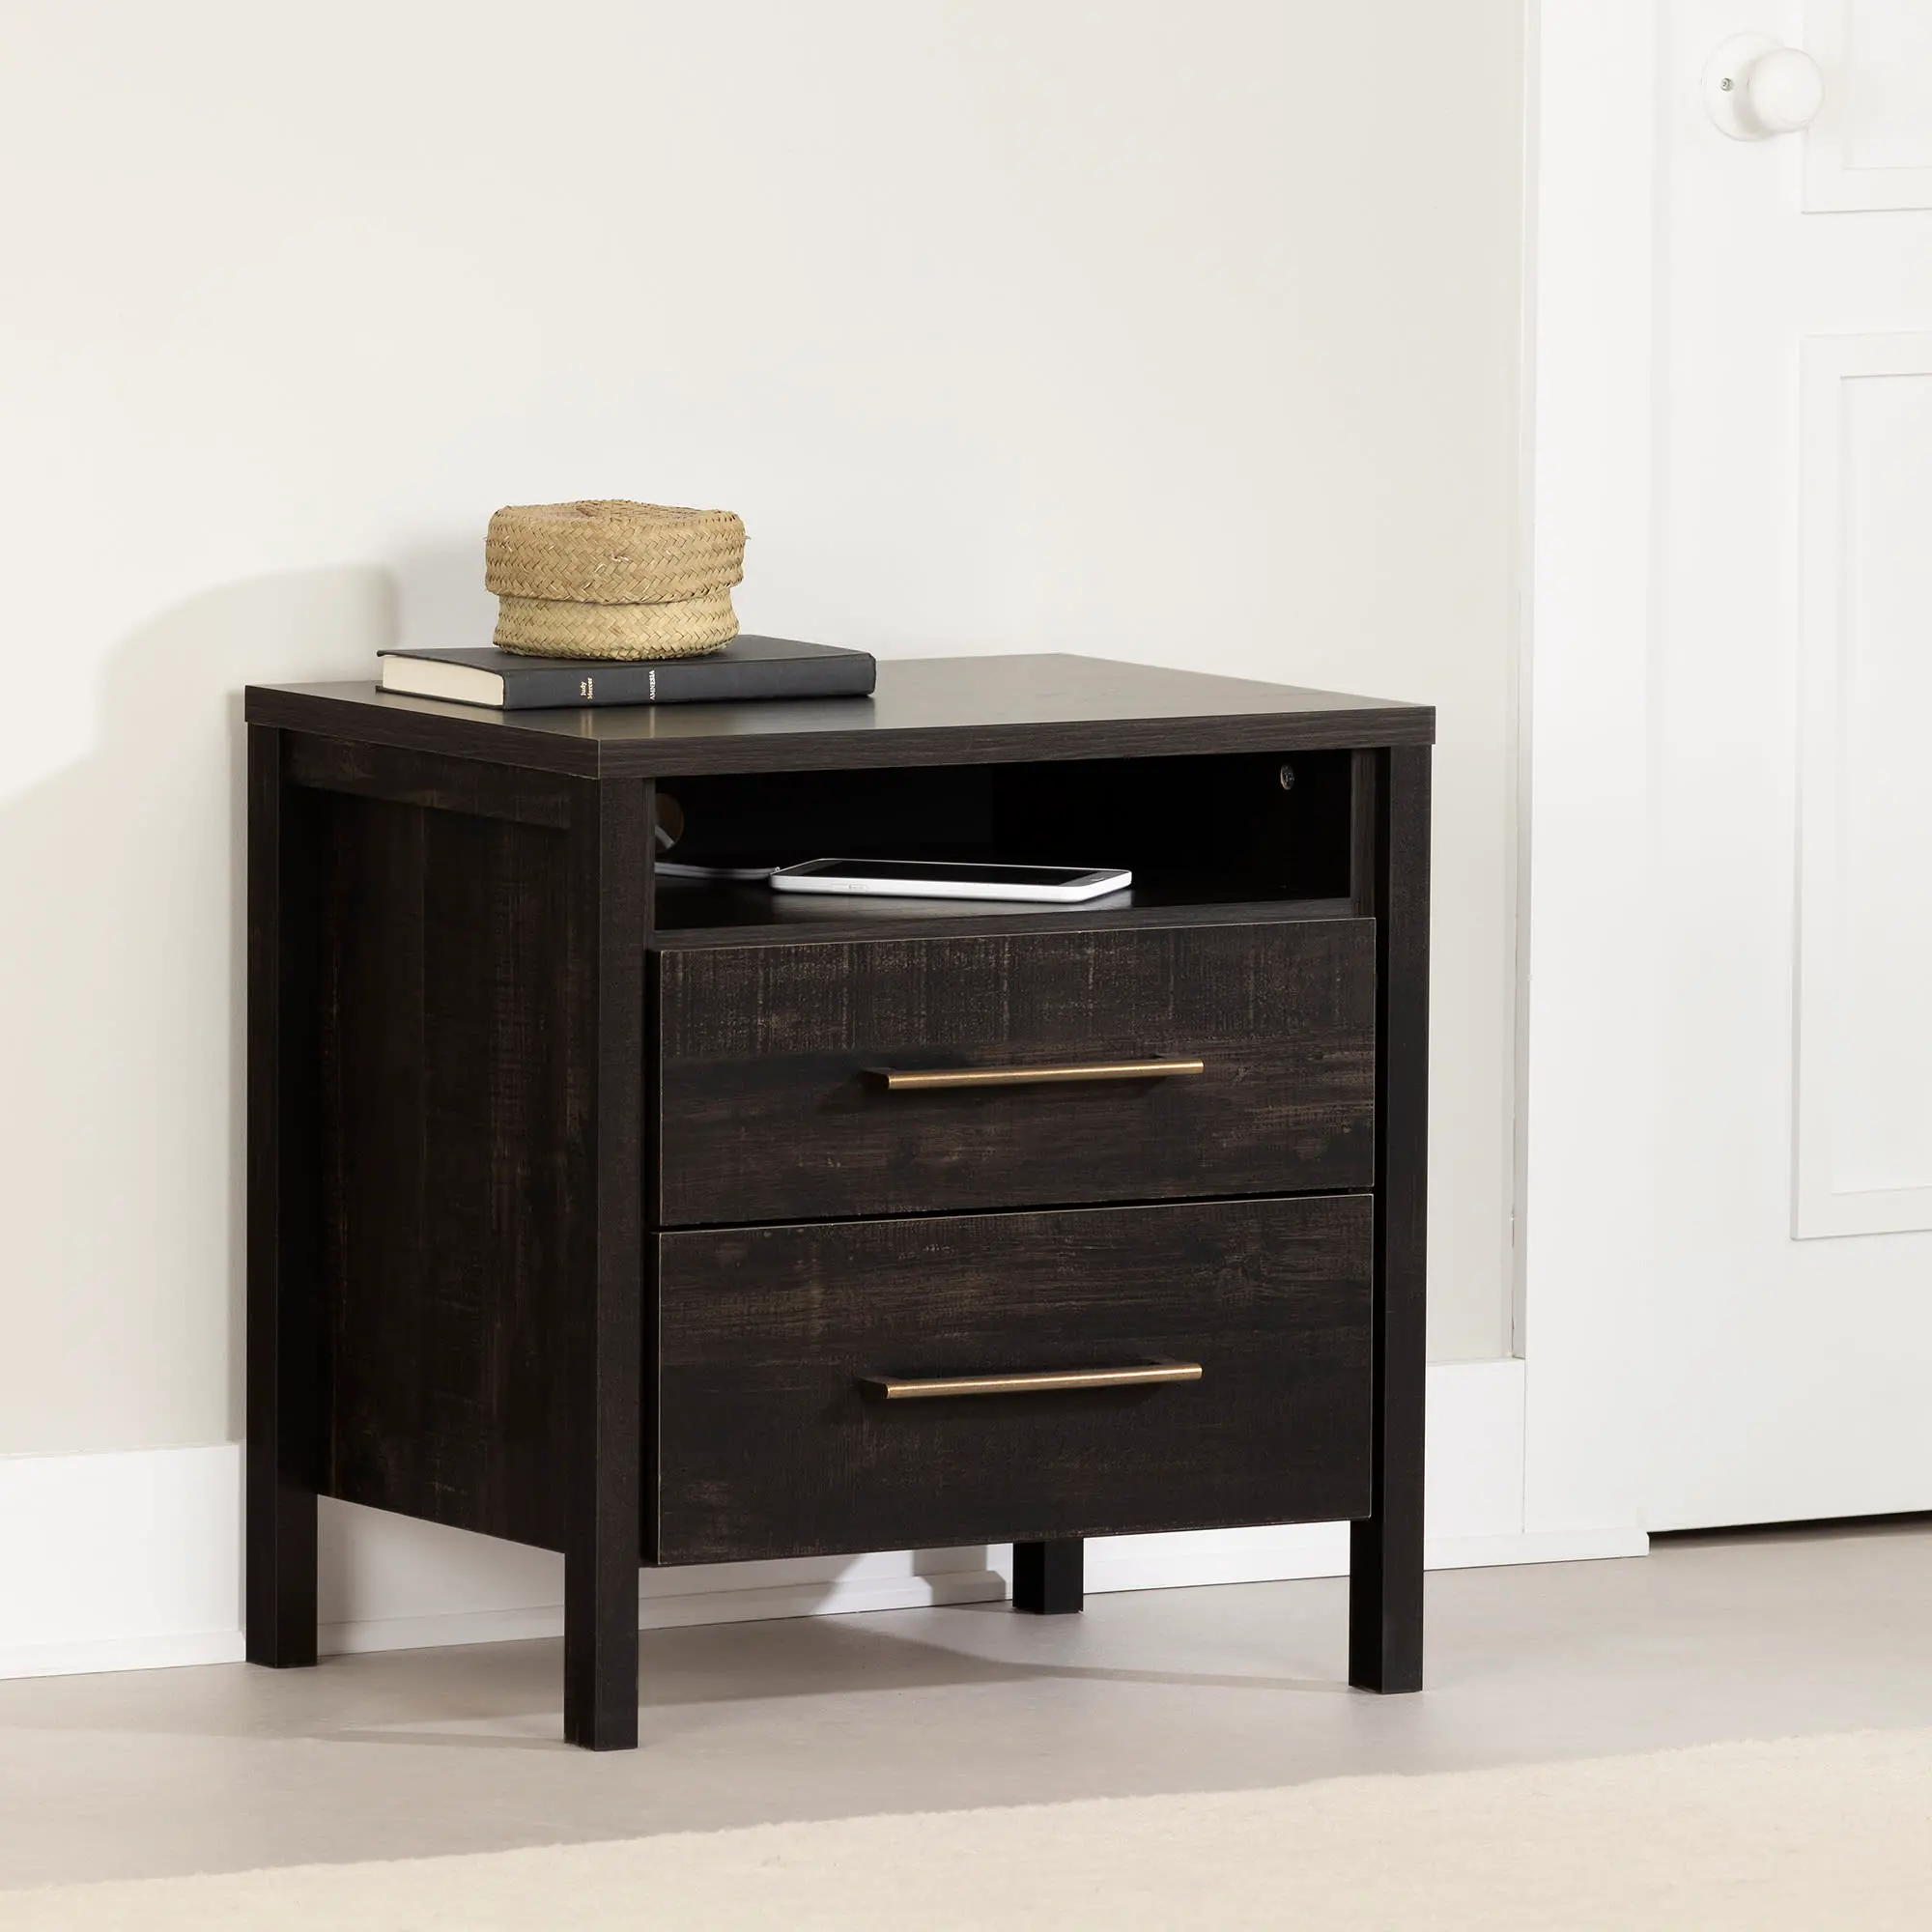 Gravity Rubbed Black 2 Drawer Nightstand - South Shore